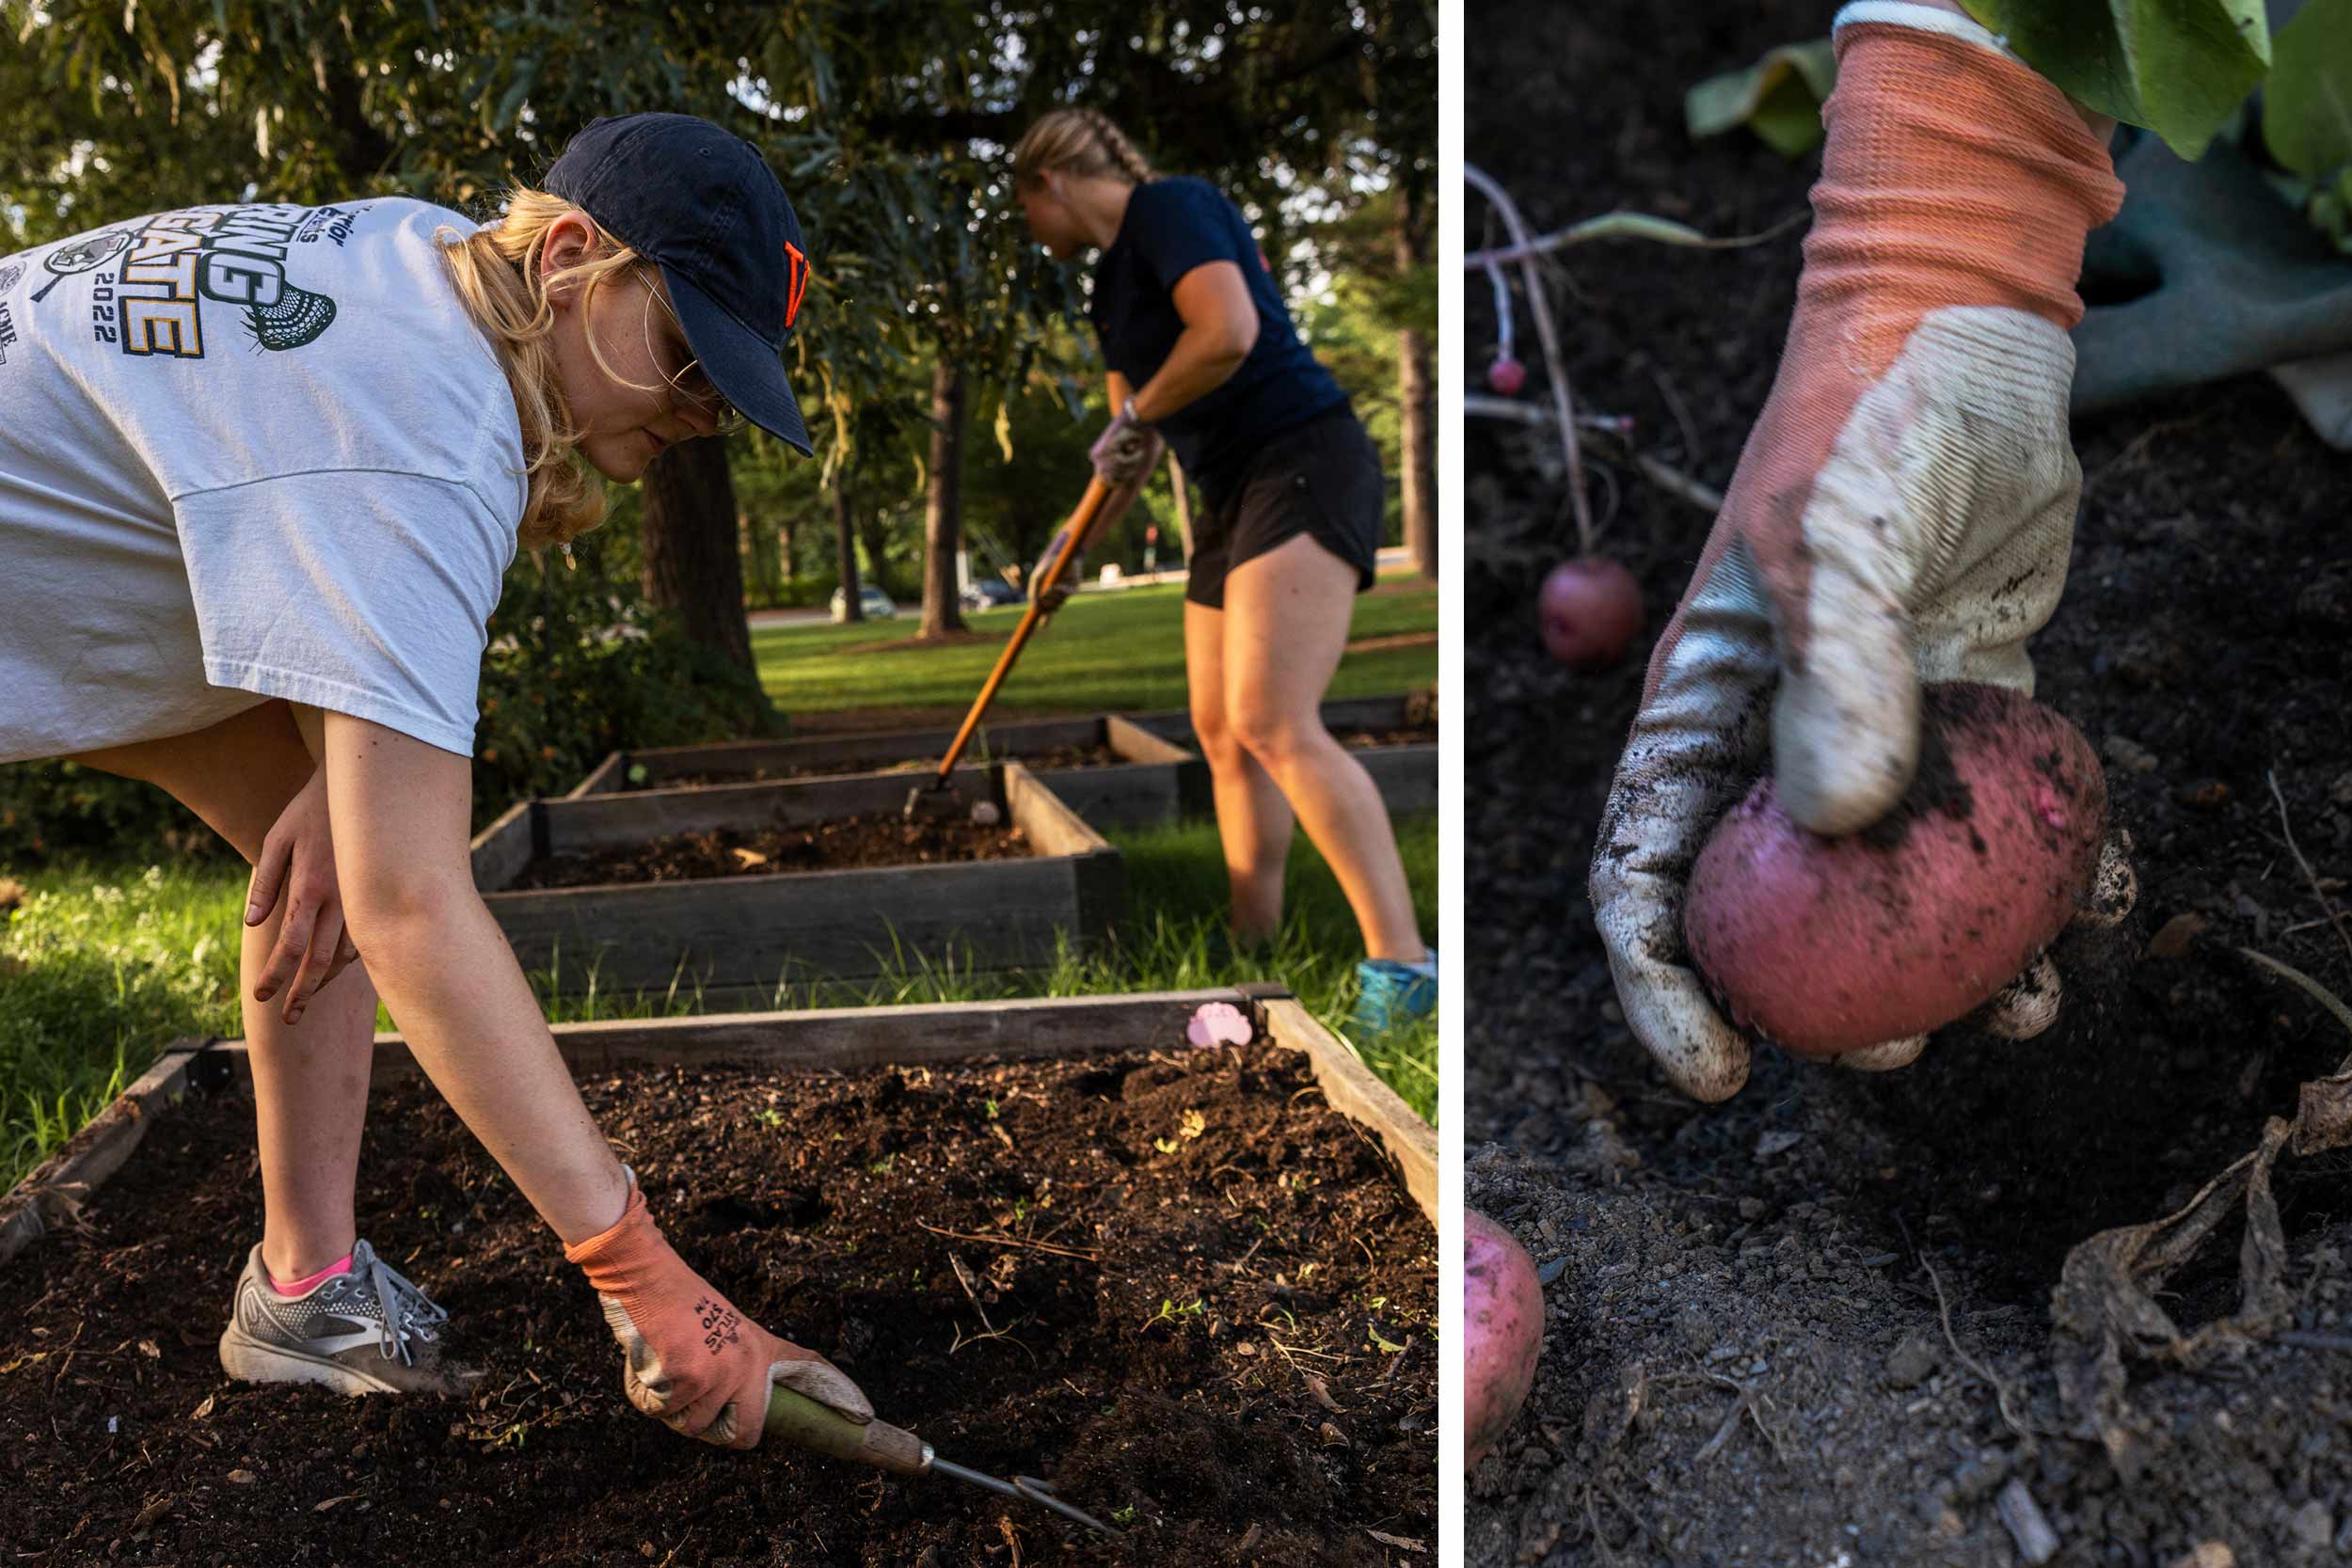 Students use hand tools to loosen dirt in a garden bed, and a hand picks up a potato.